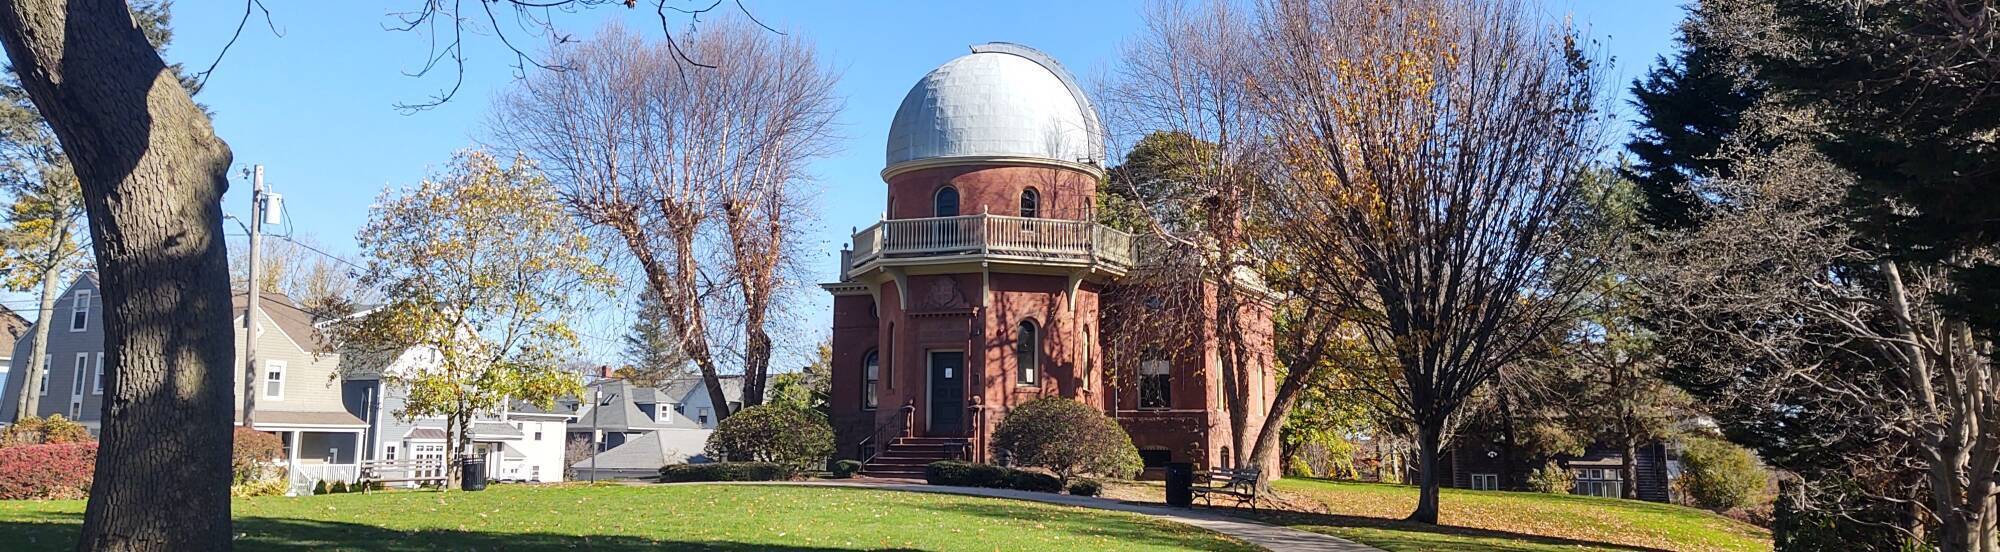 Ladd Observatory in Providence.